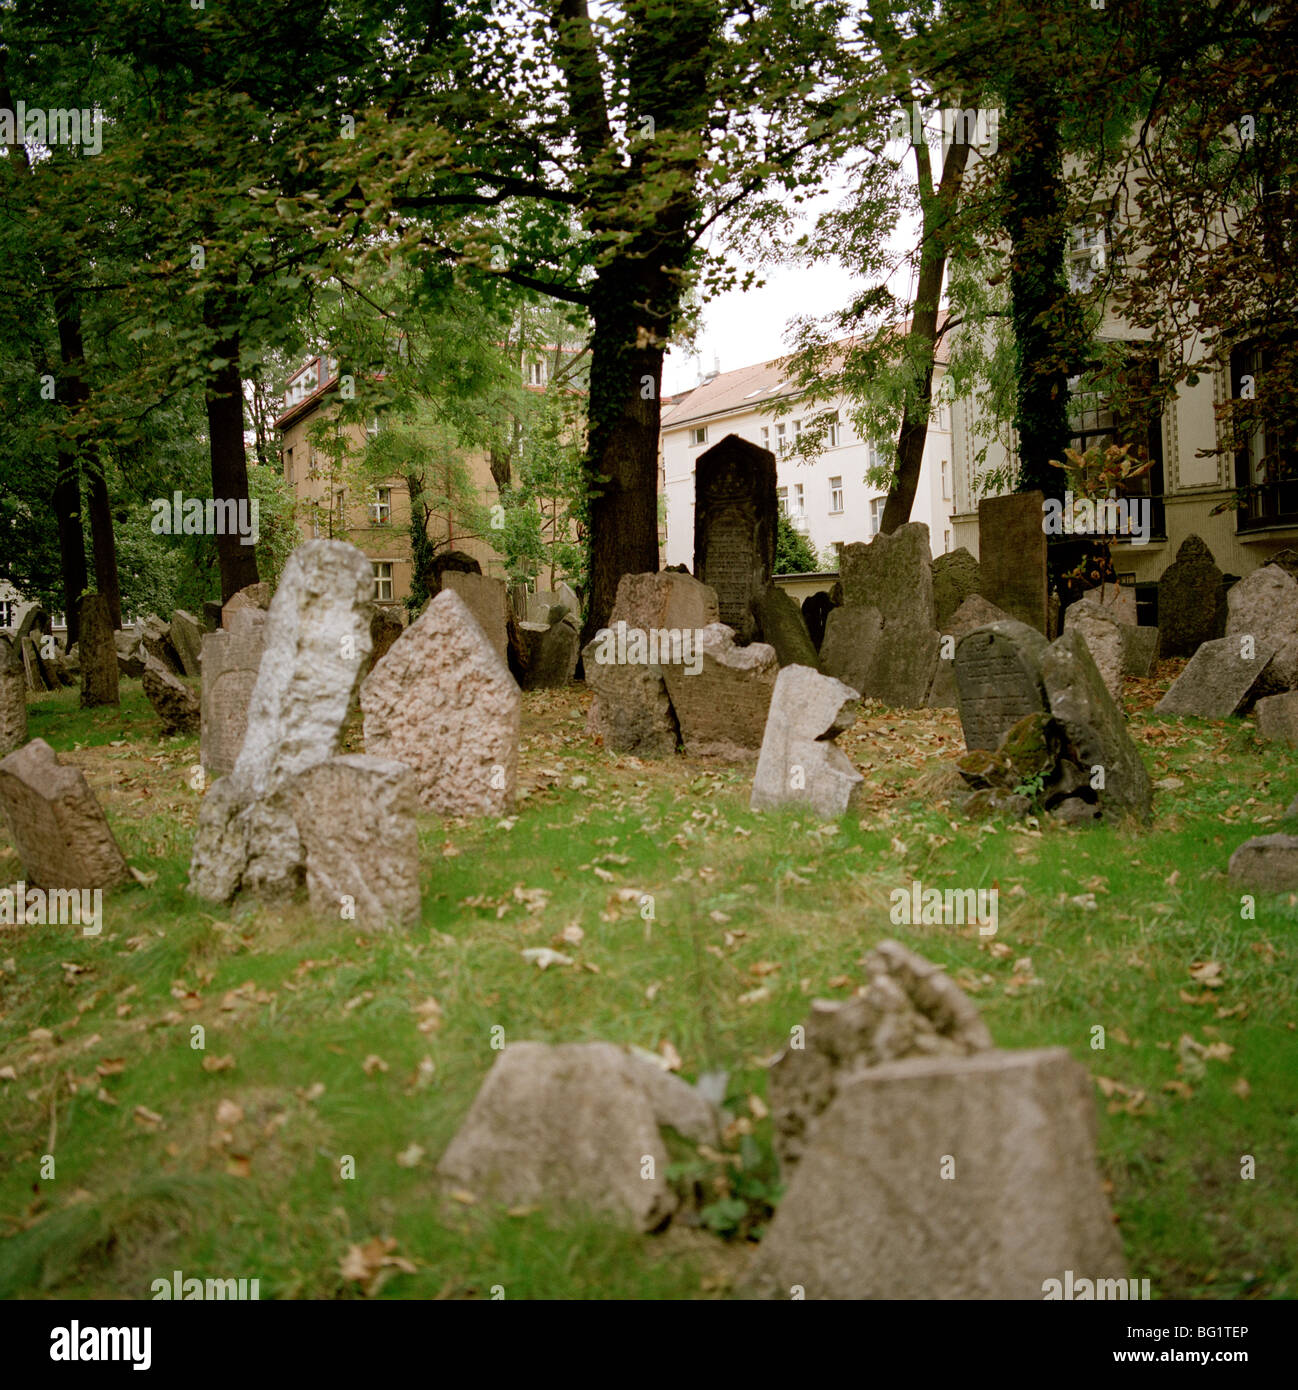 World Travel. Old Jewish Cemetery in Josefov in ancient city of Prague in the Czech Republic in Eastern Europe. Culture History Traveller Wanderlust Stock Photo